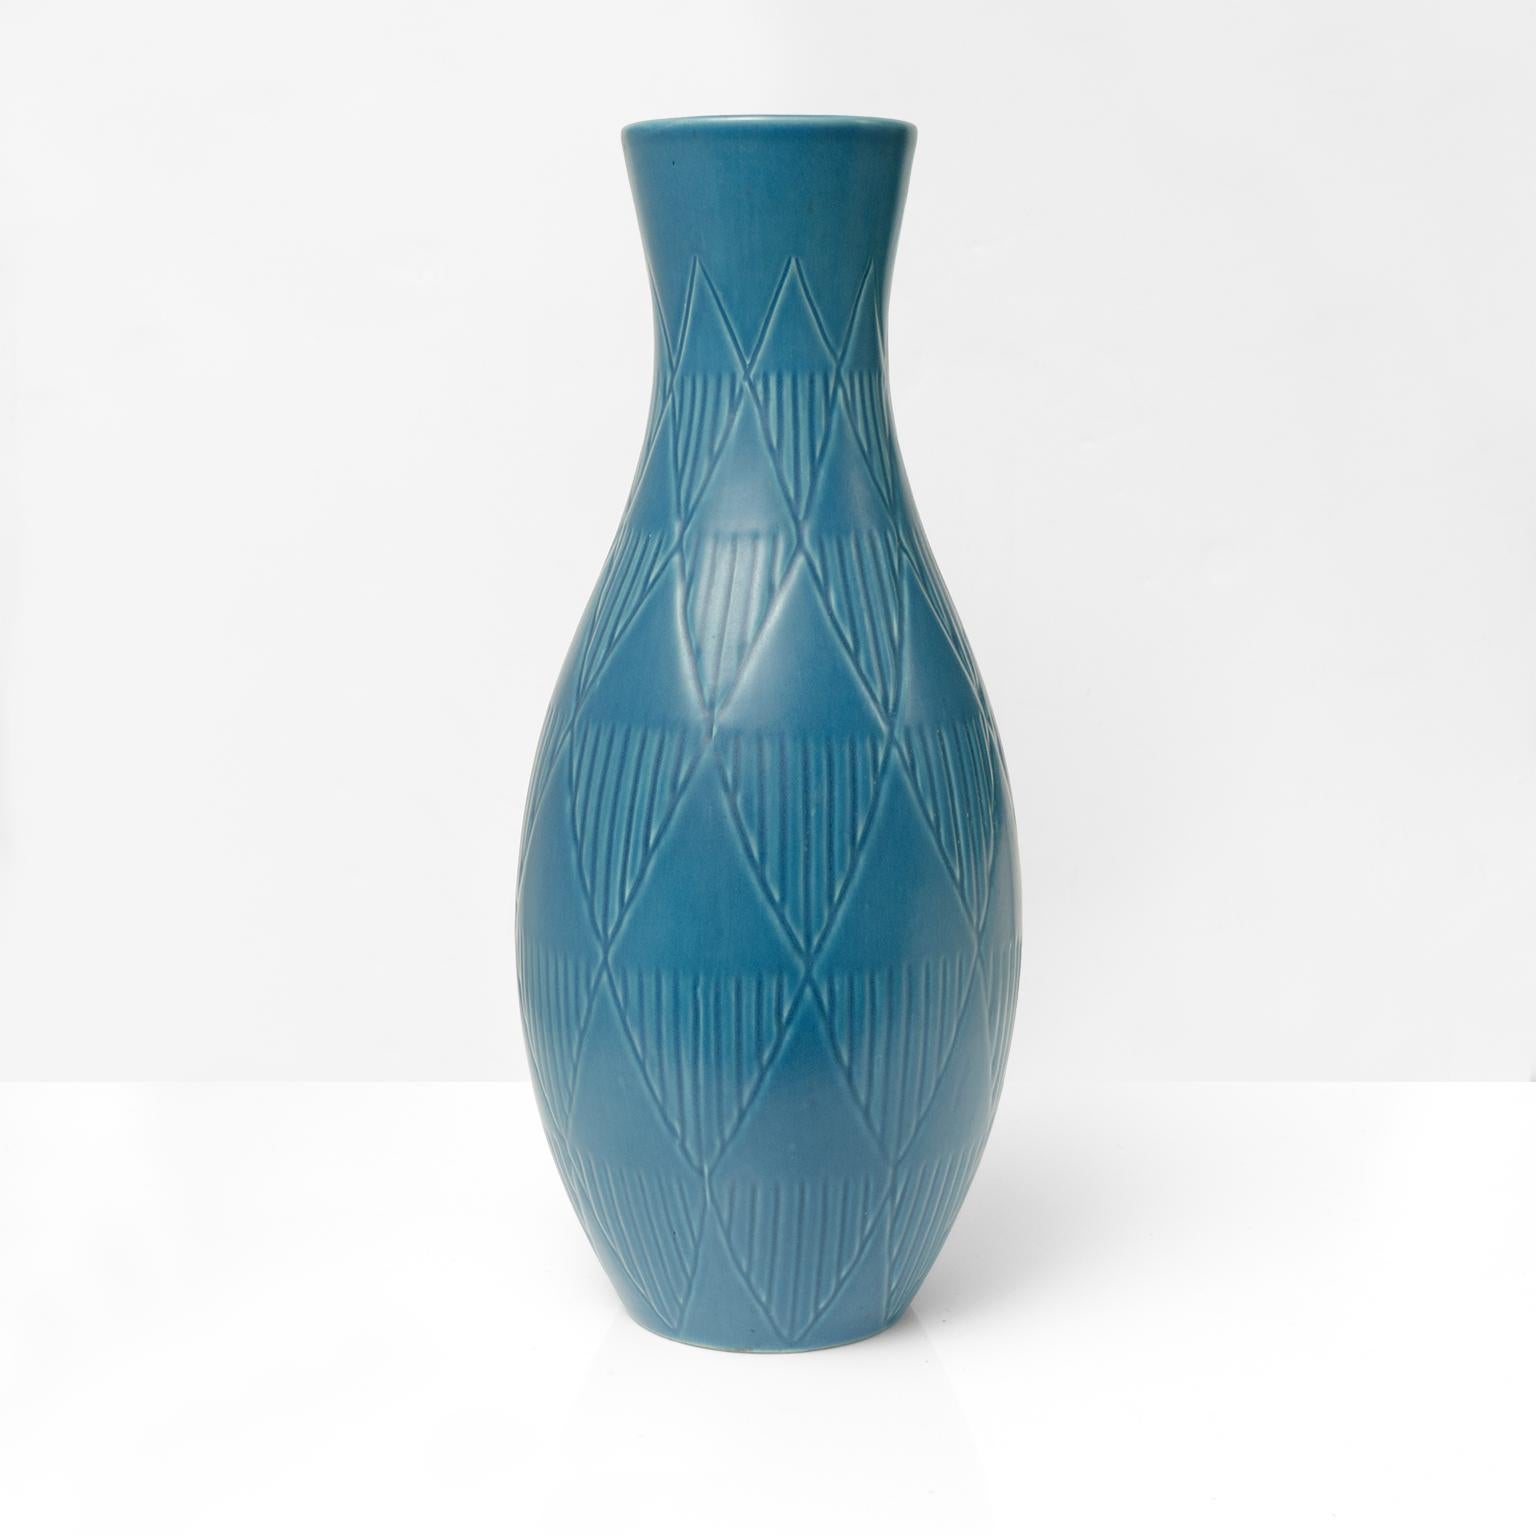 Bo Fajans blue ceramic bulbous vase with geometric pattern in relief. Produced by Bo Fajans, Sweden. circa late 1940’s

Height: 18.5”. Diameter: 6”